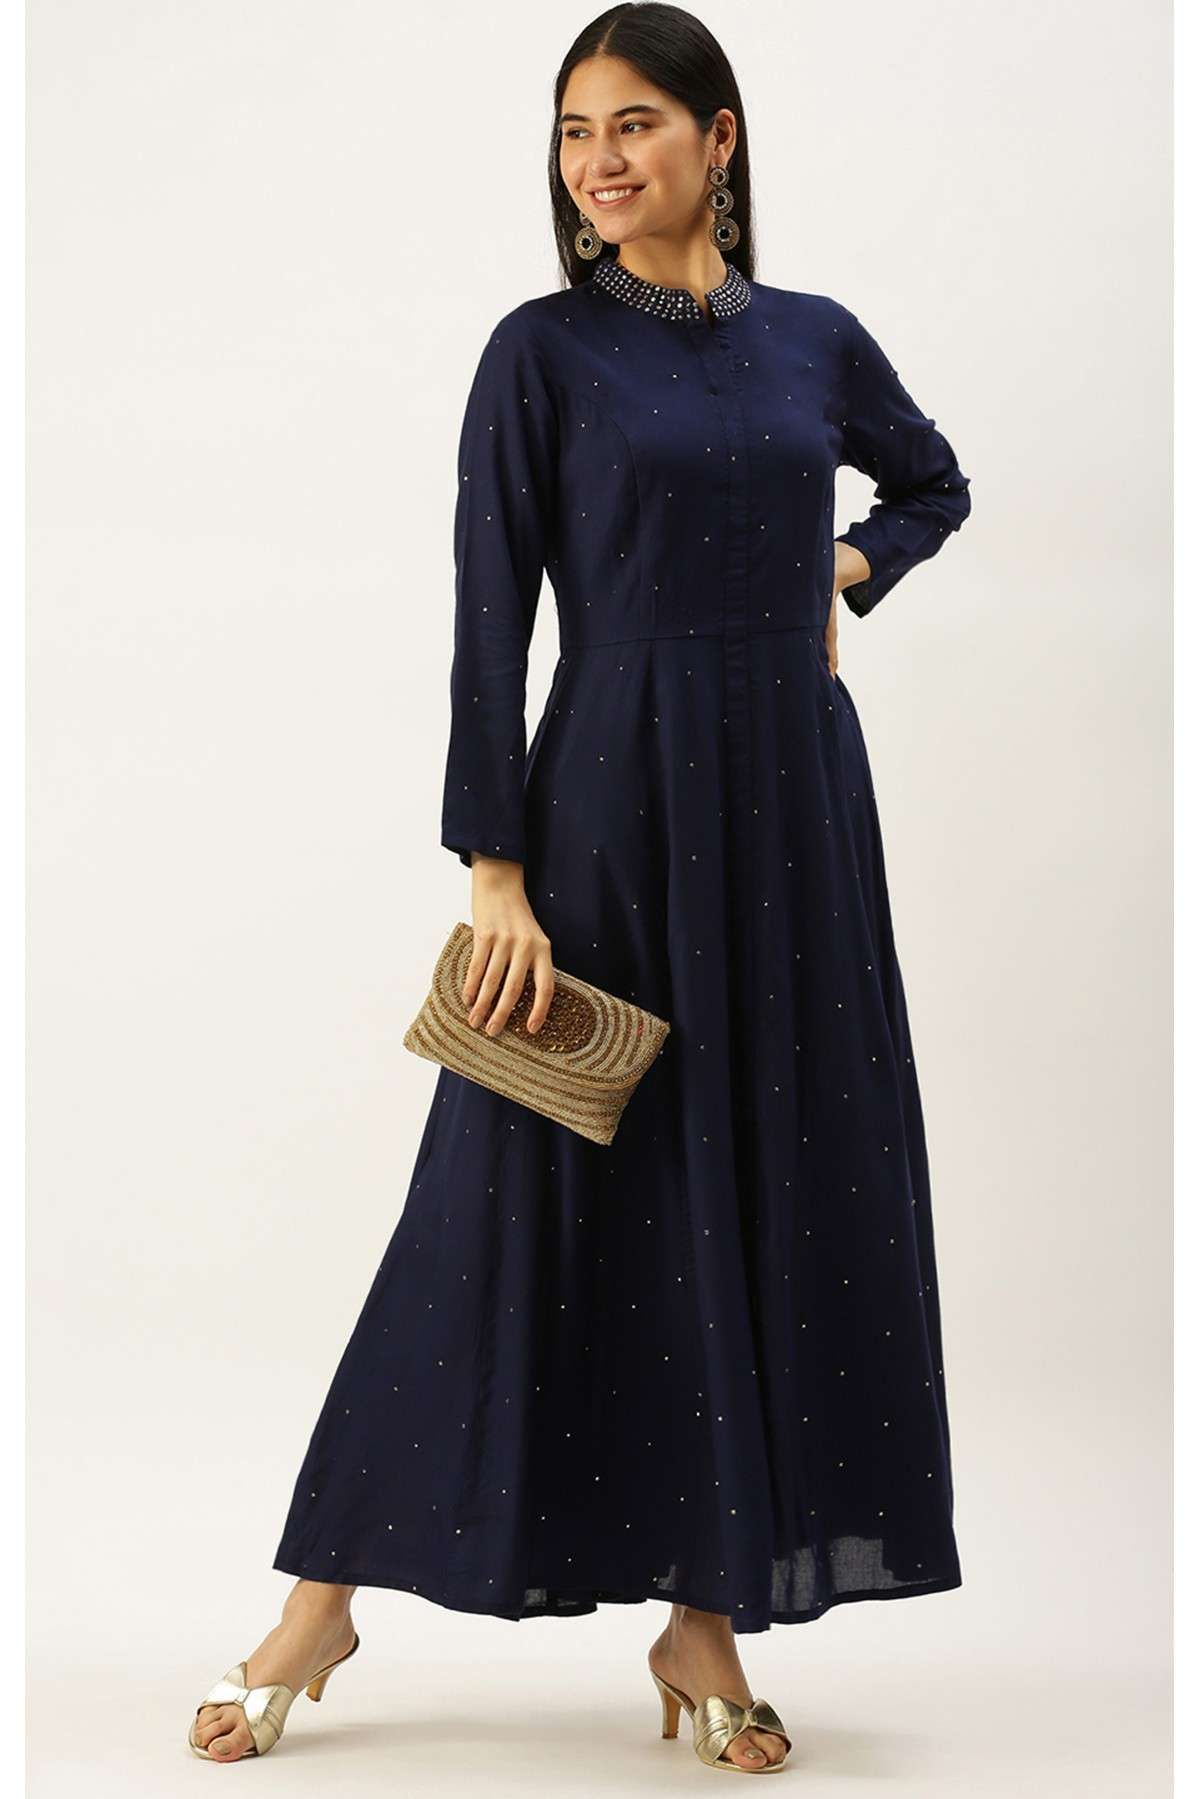 Elegant Royal Blue Lace Spaghetti Strap Navy Evening Gowns With A Line And  Plunging Neckline For Womens Prom And Party From Lilliantan, $110.64 |  DHgate.Com